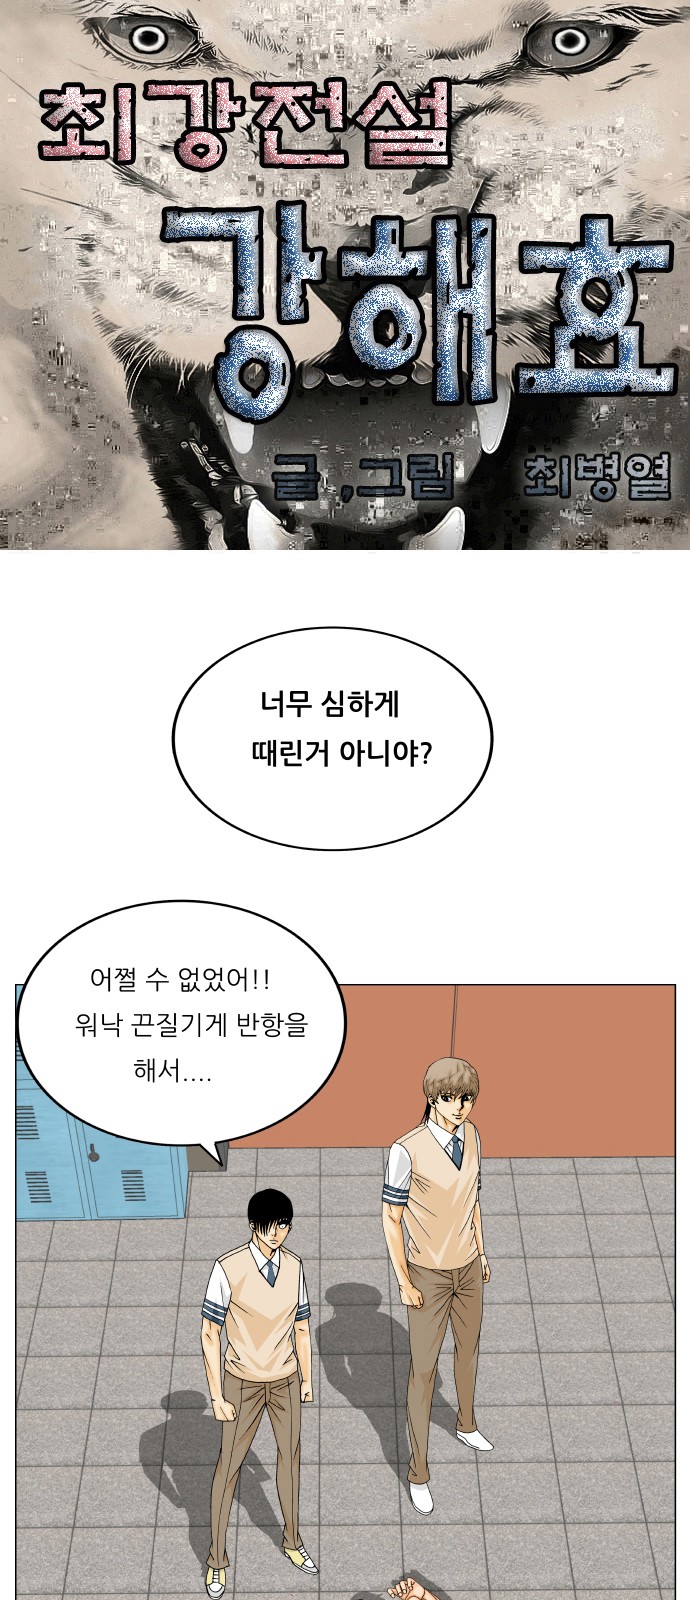 Ultimate Legend - Kang Hae Hyo - Chapter 476 - Page 1